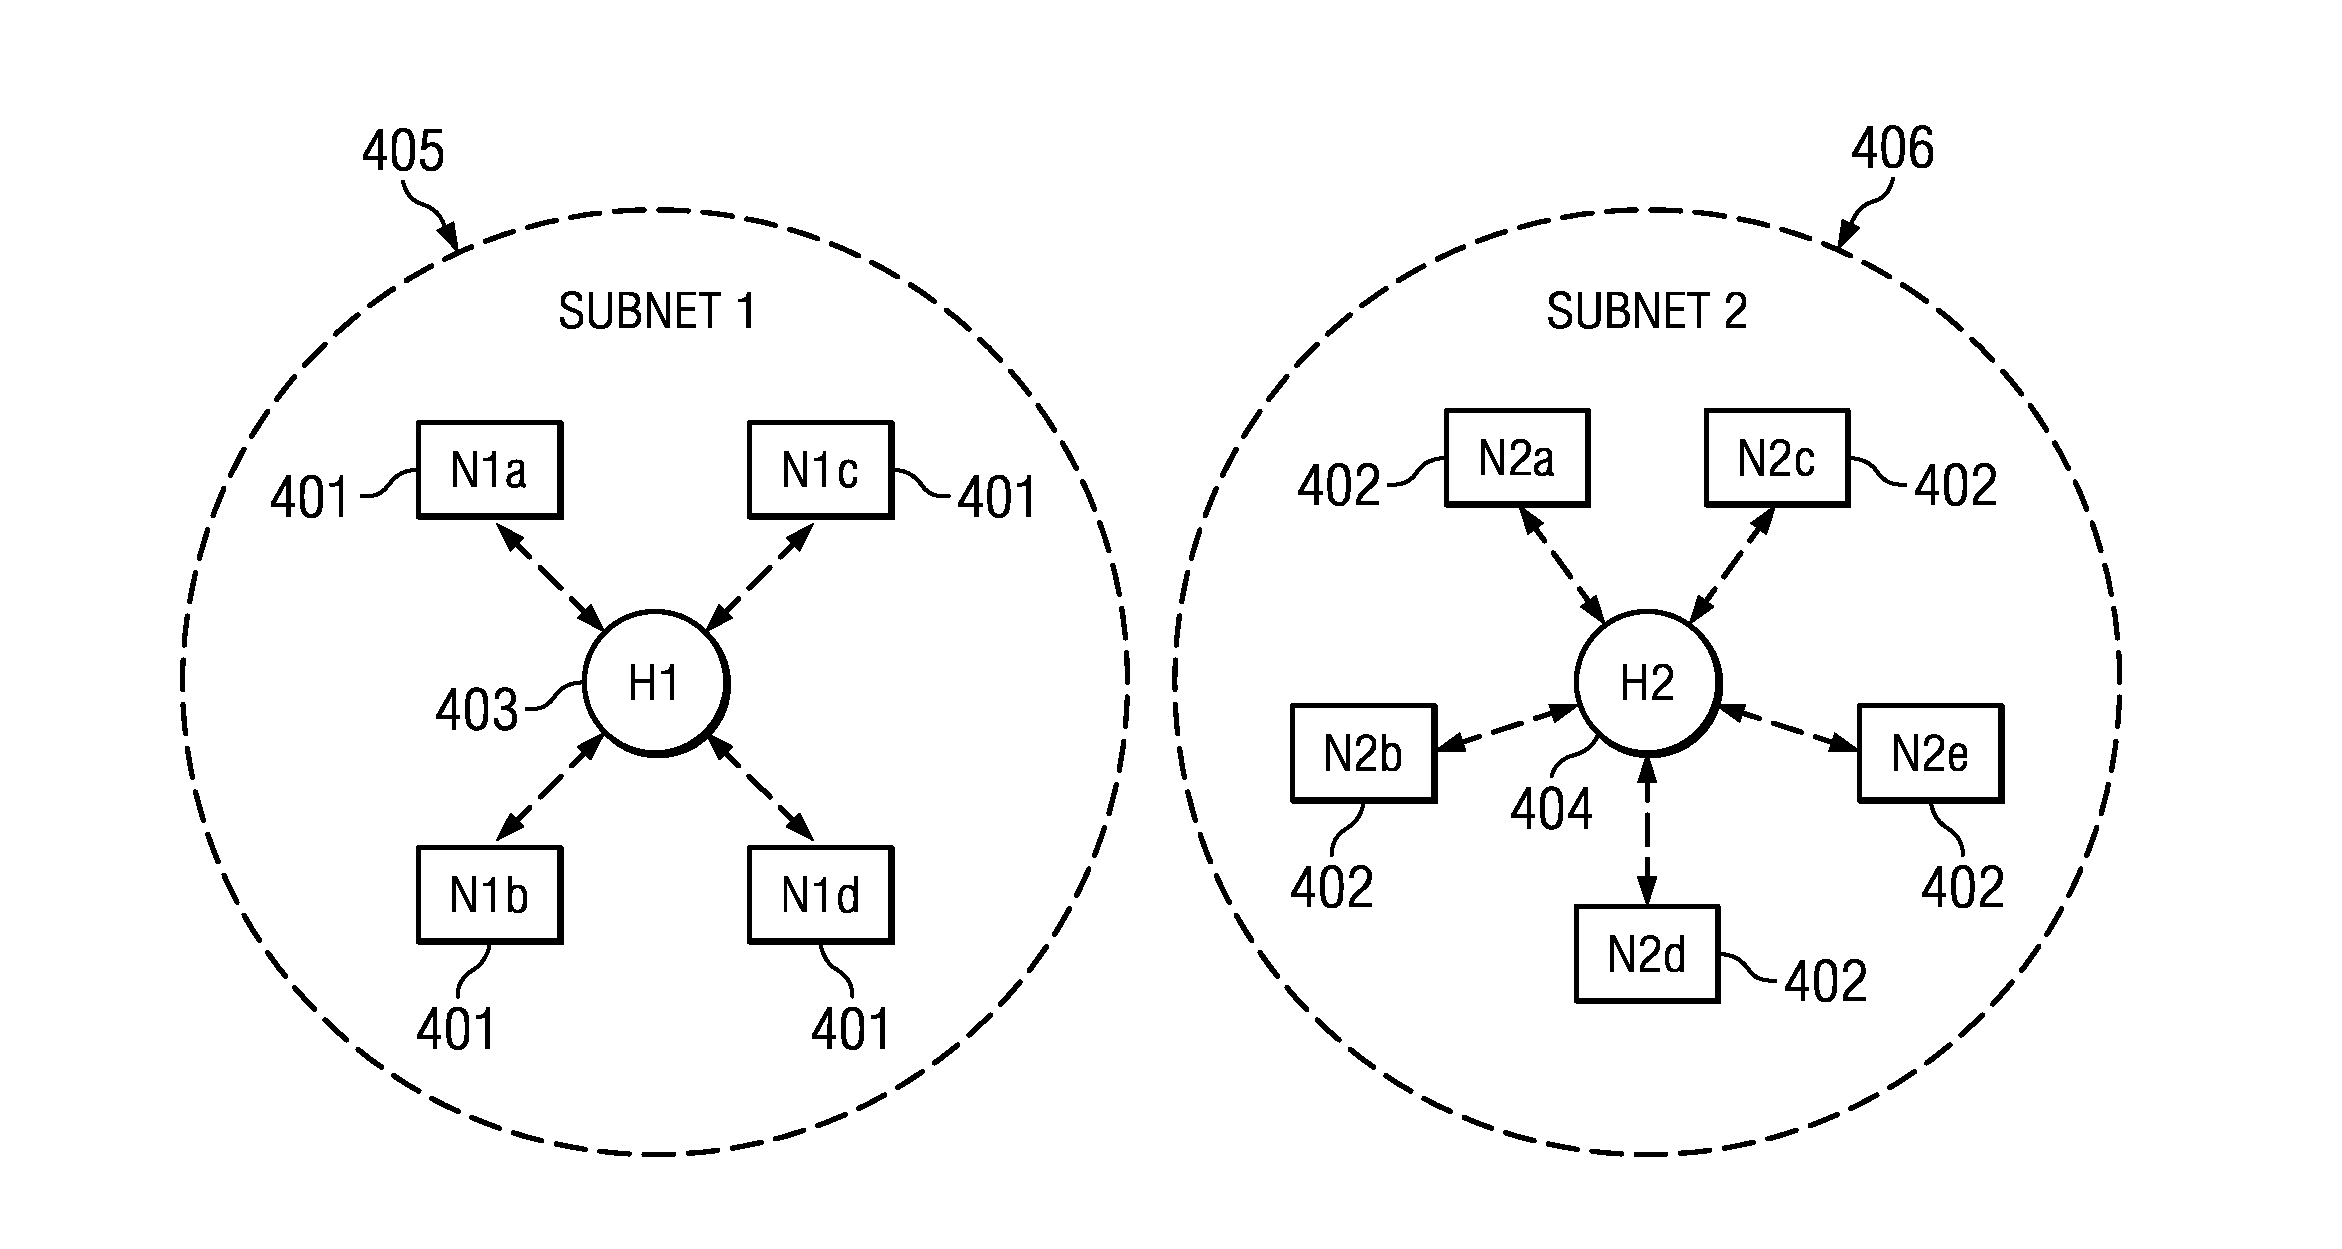 Smart Adjustment of Backoff Counter and Contention Window for Improved Random Access